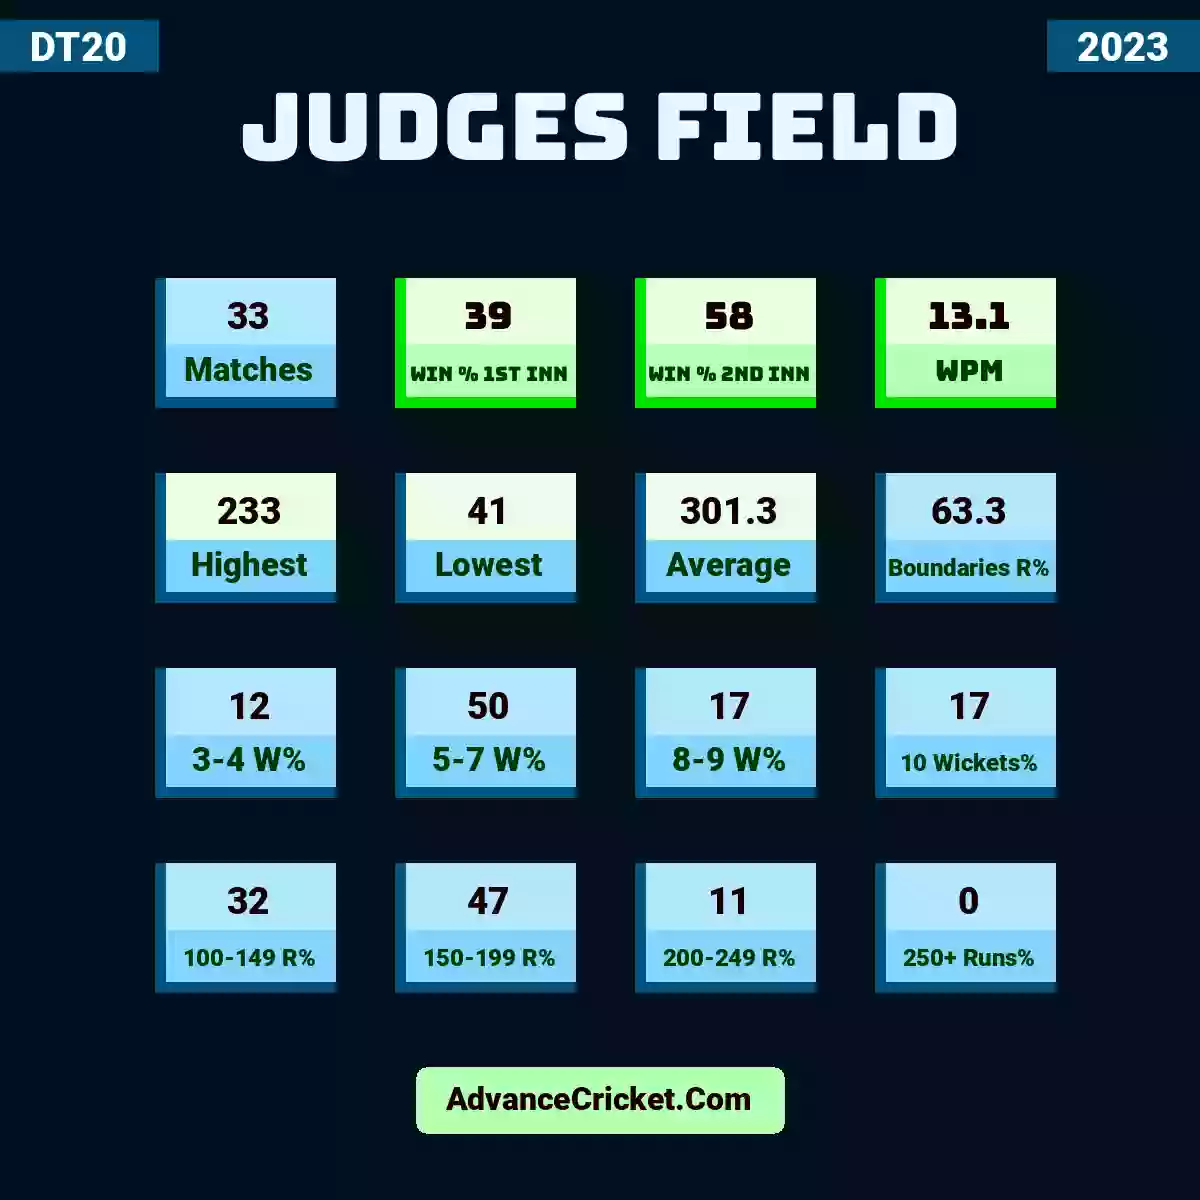 Image showing Judges Field with Matches: 33, Win % 1st Inn: 39, Win % 2nd Inn: 58, WPM: 13.1, Highest: 233, Lowest: 41, Average: 301.3, Boundaries R%: 63.3, 3-4 W%: 12, 5-7 W%: 50, 8-9 W%: 17, 10 Wickets%: 17, 100-149 R%: 32, 150-199 R%: 47, 200-249 R%: 11, 250+ Runs%: 0.